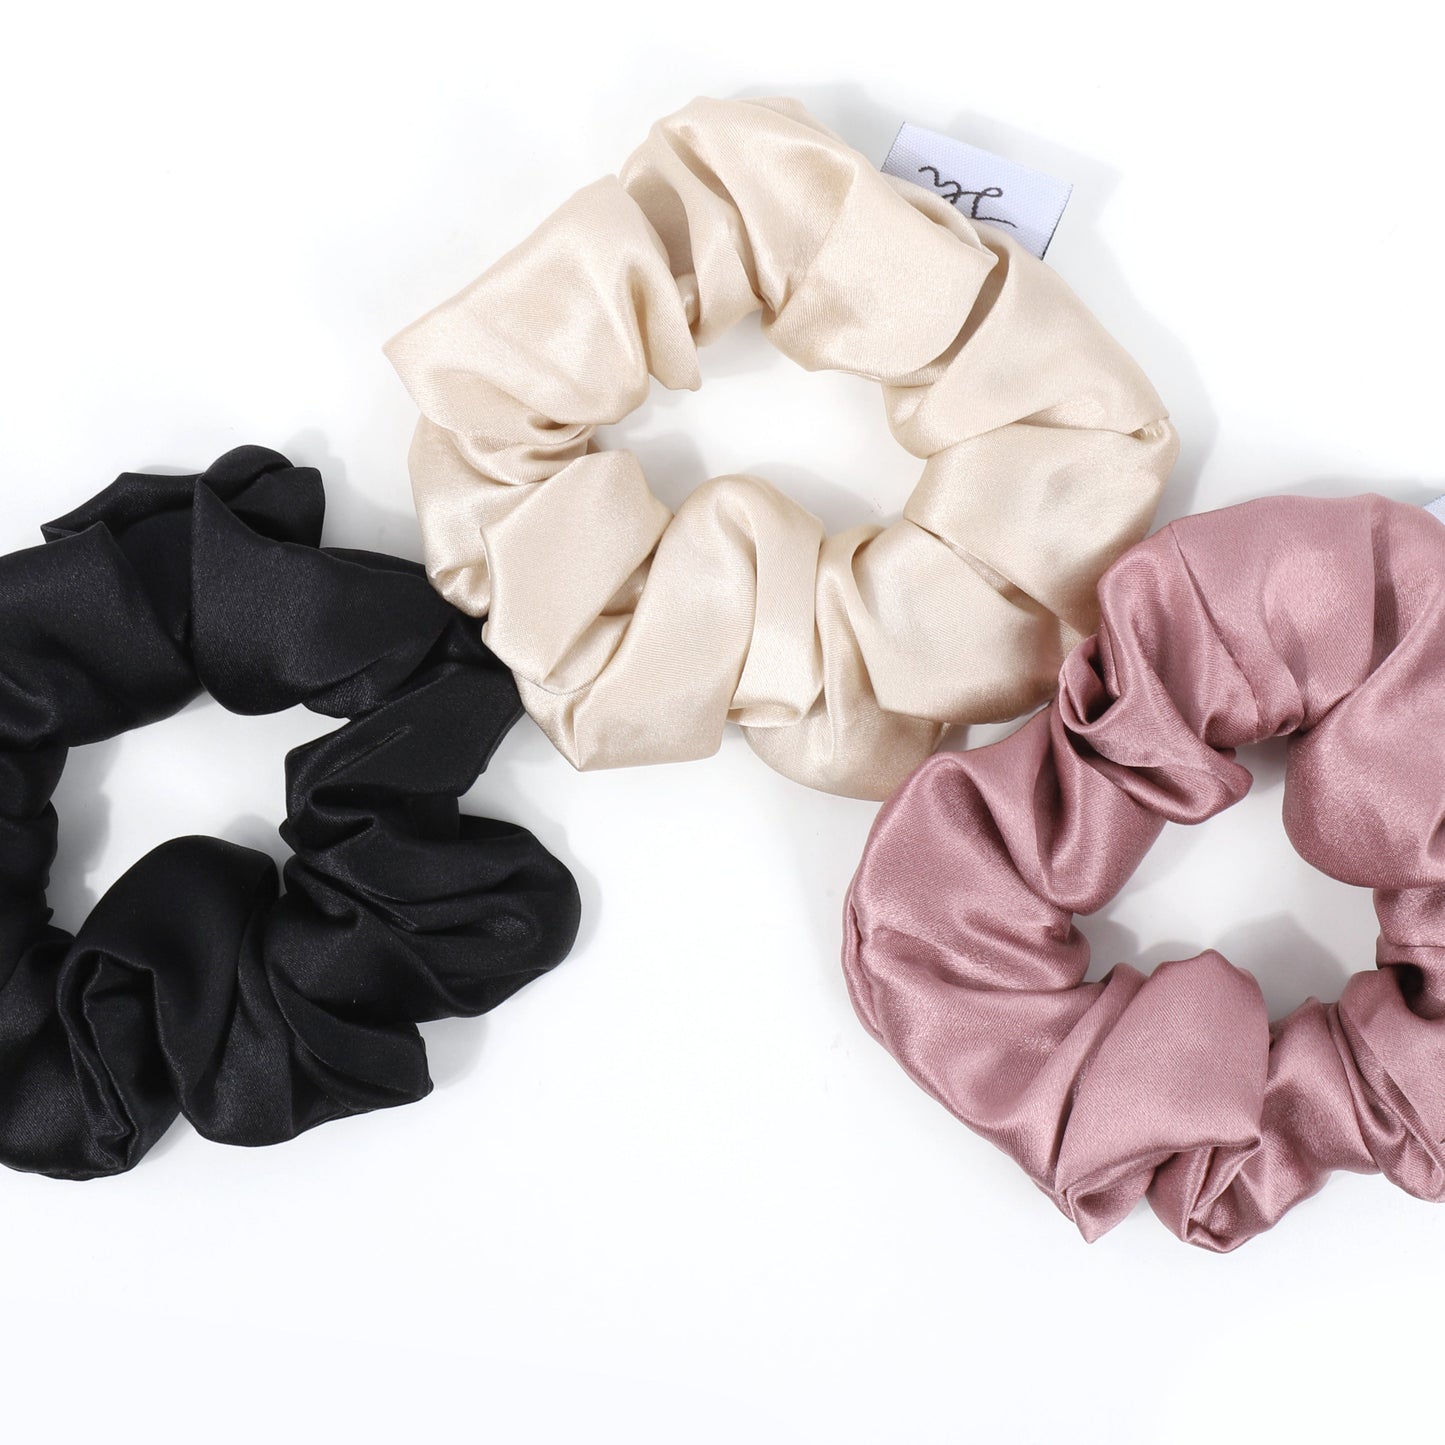 Síoda Silky 100% Mulberry Silk scrunchies size medium colours grouped together are Prosecco Gold, Blush pink, Midnight Black